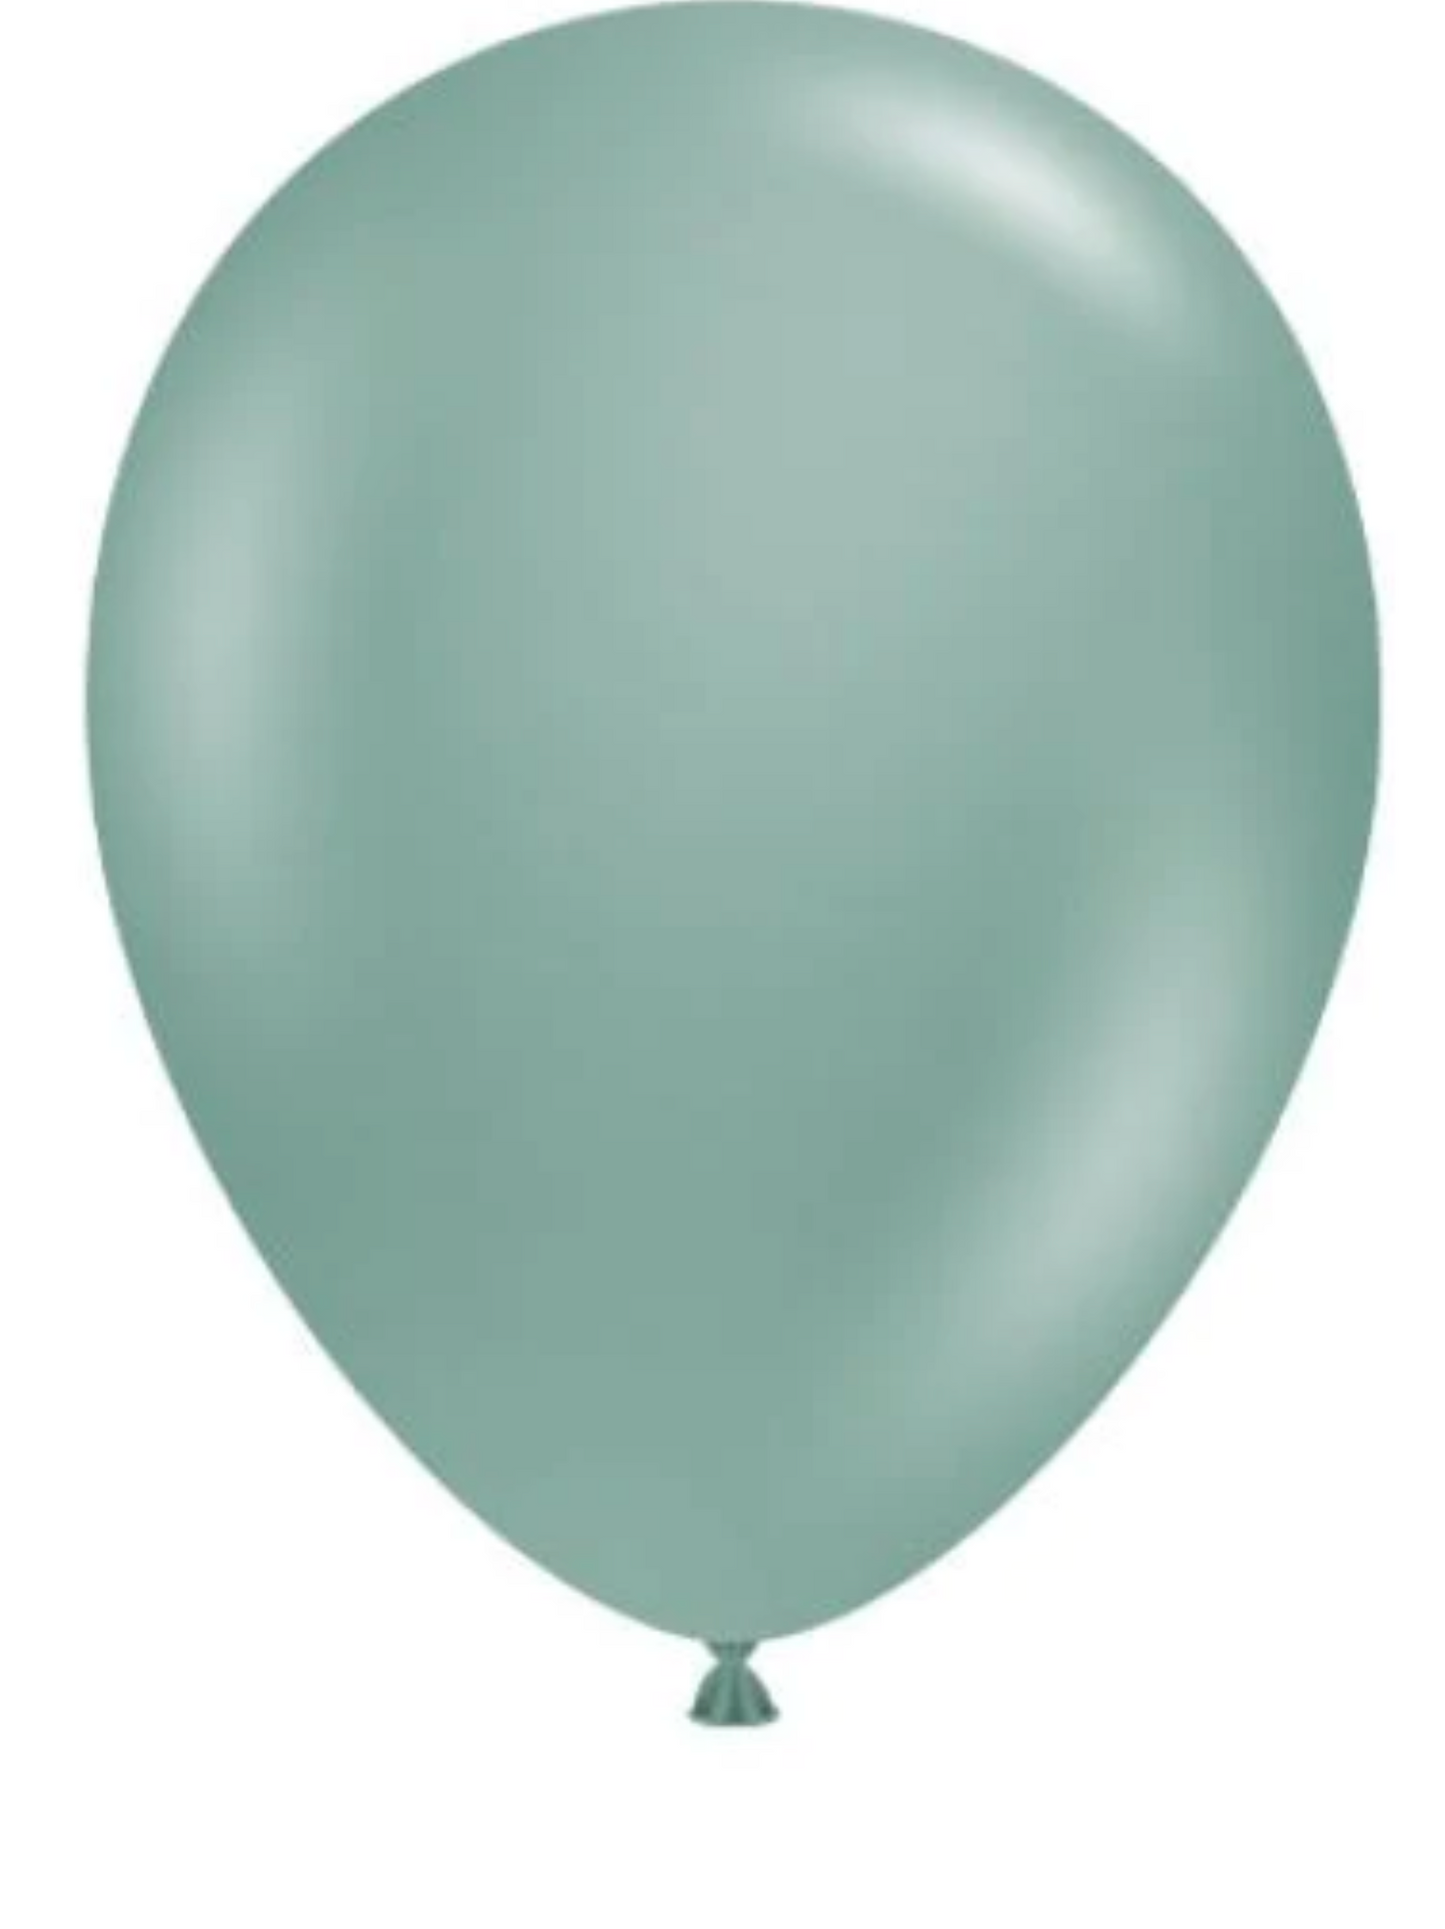 WILLOW -  BALLOON in Sizes - small, regular or large Individual balloons Balloonz   